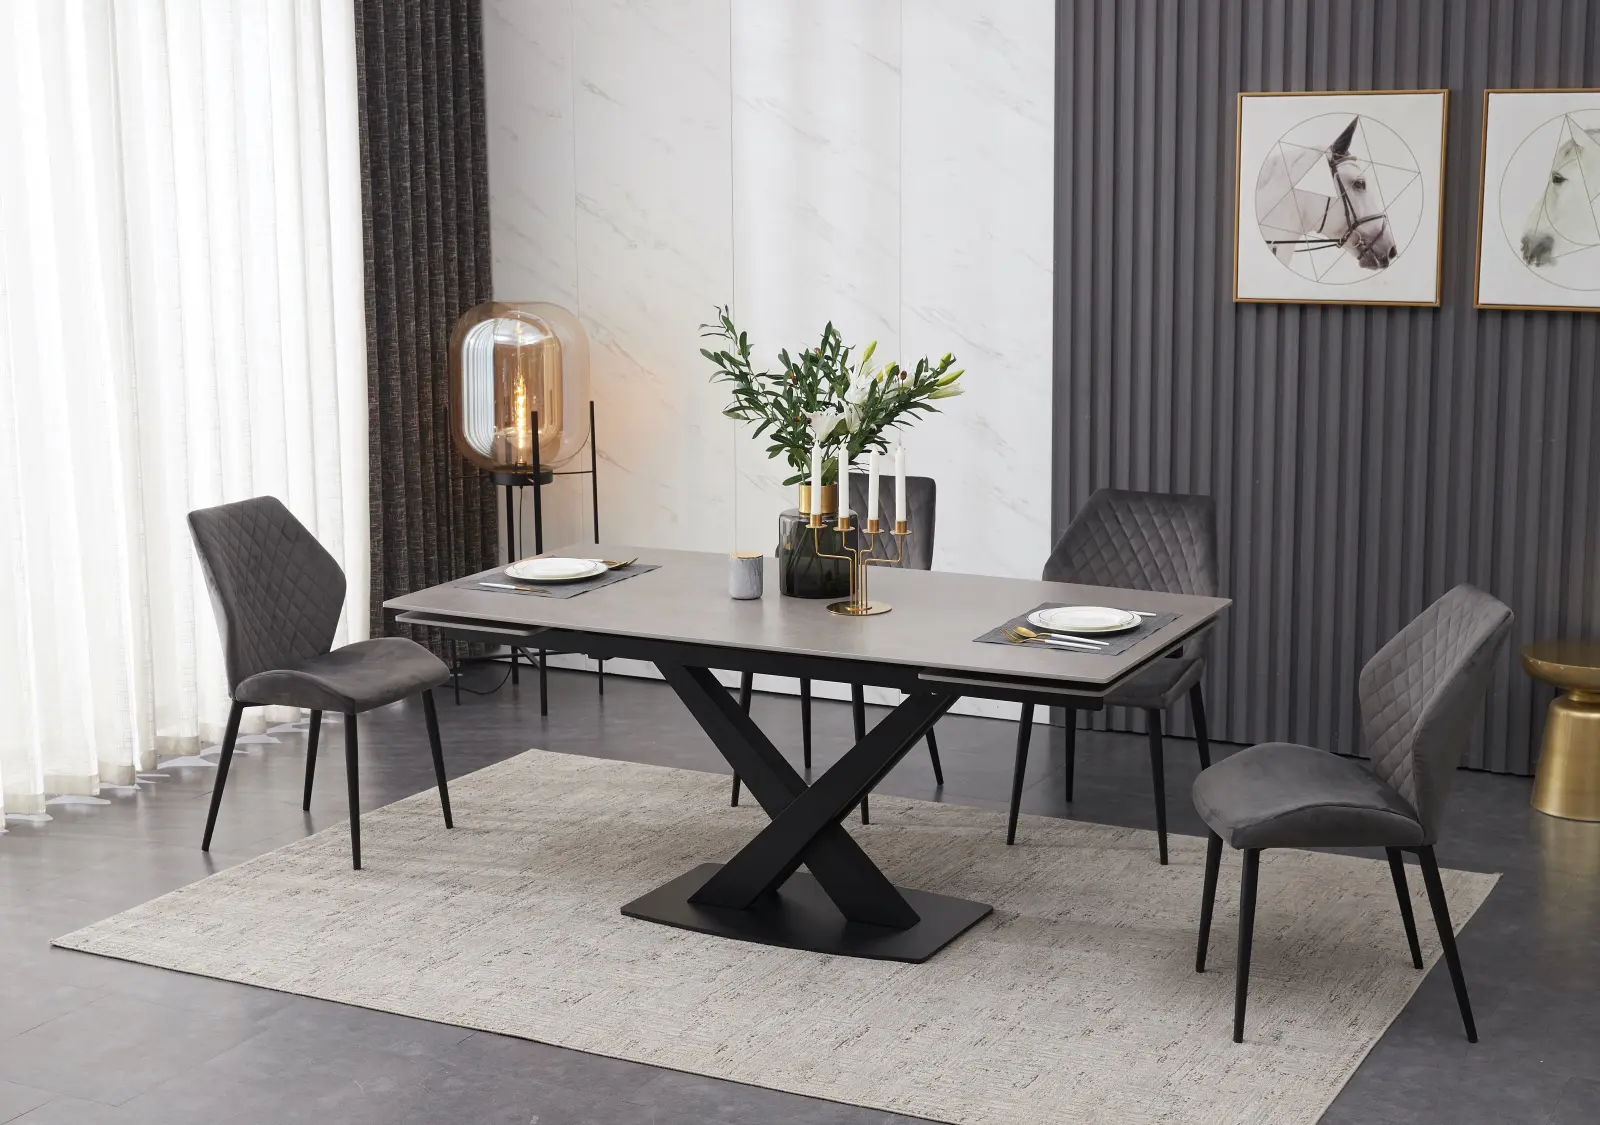 Ceramic Grey Table With 6 Modern, Modern Dining Room Table And Chairs Uk